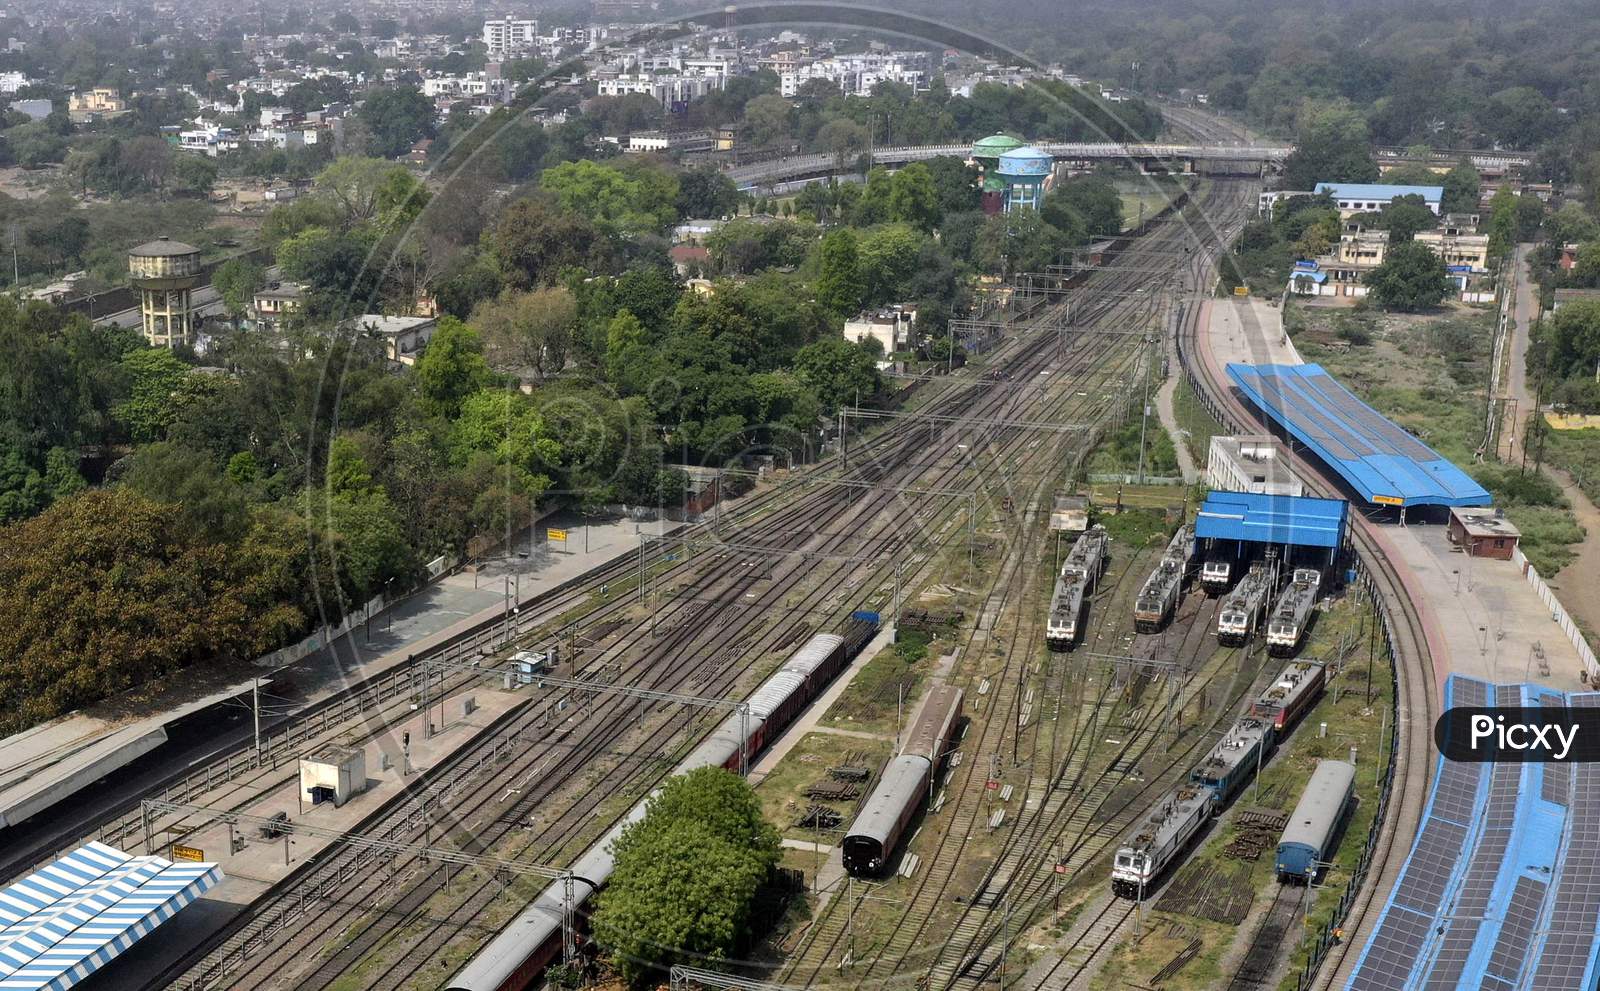 A View Of Empty Prayag Junction Railway Station During A Nationwide Lockdown To Slow The Spreading Of The Coronavirus Disease (Covid-19), In Prayagraj, April, 19, 2020.